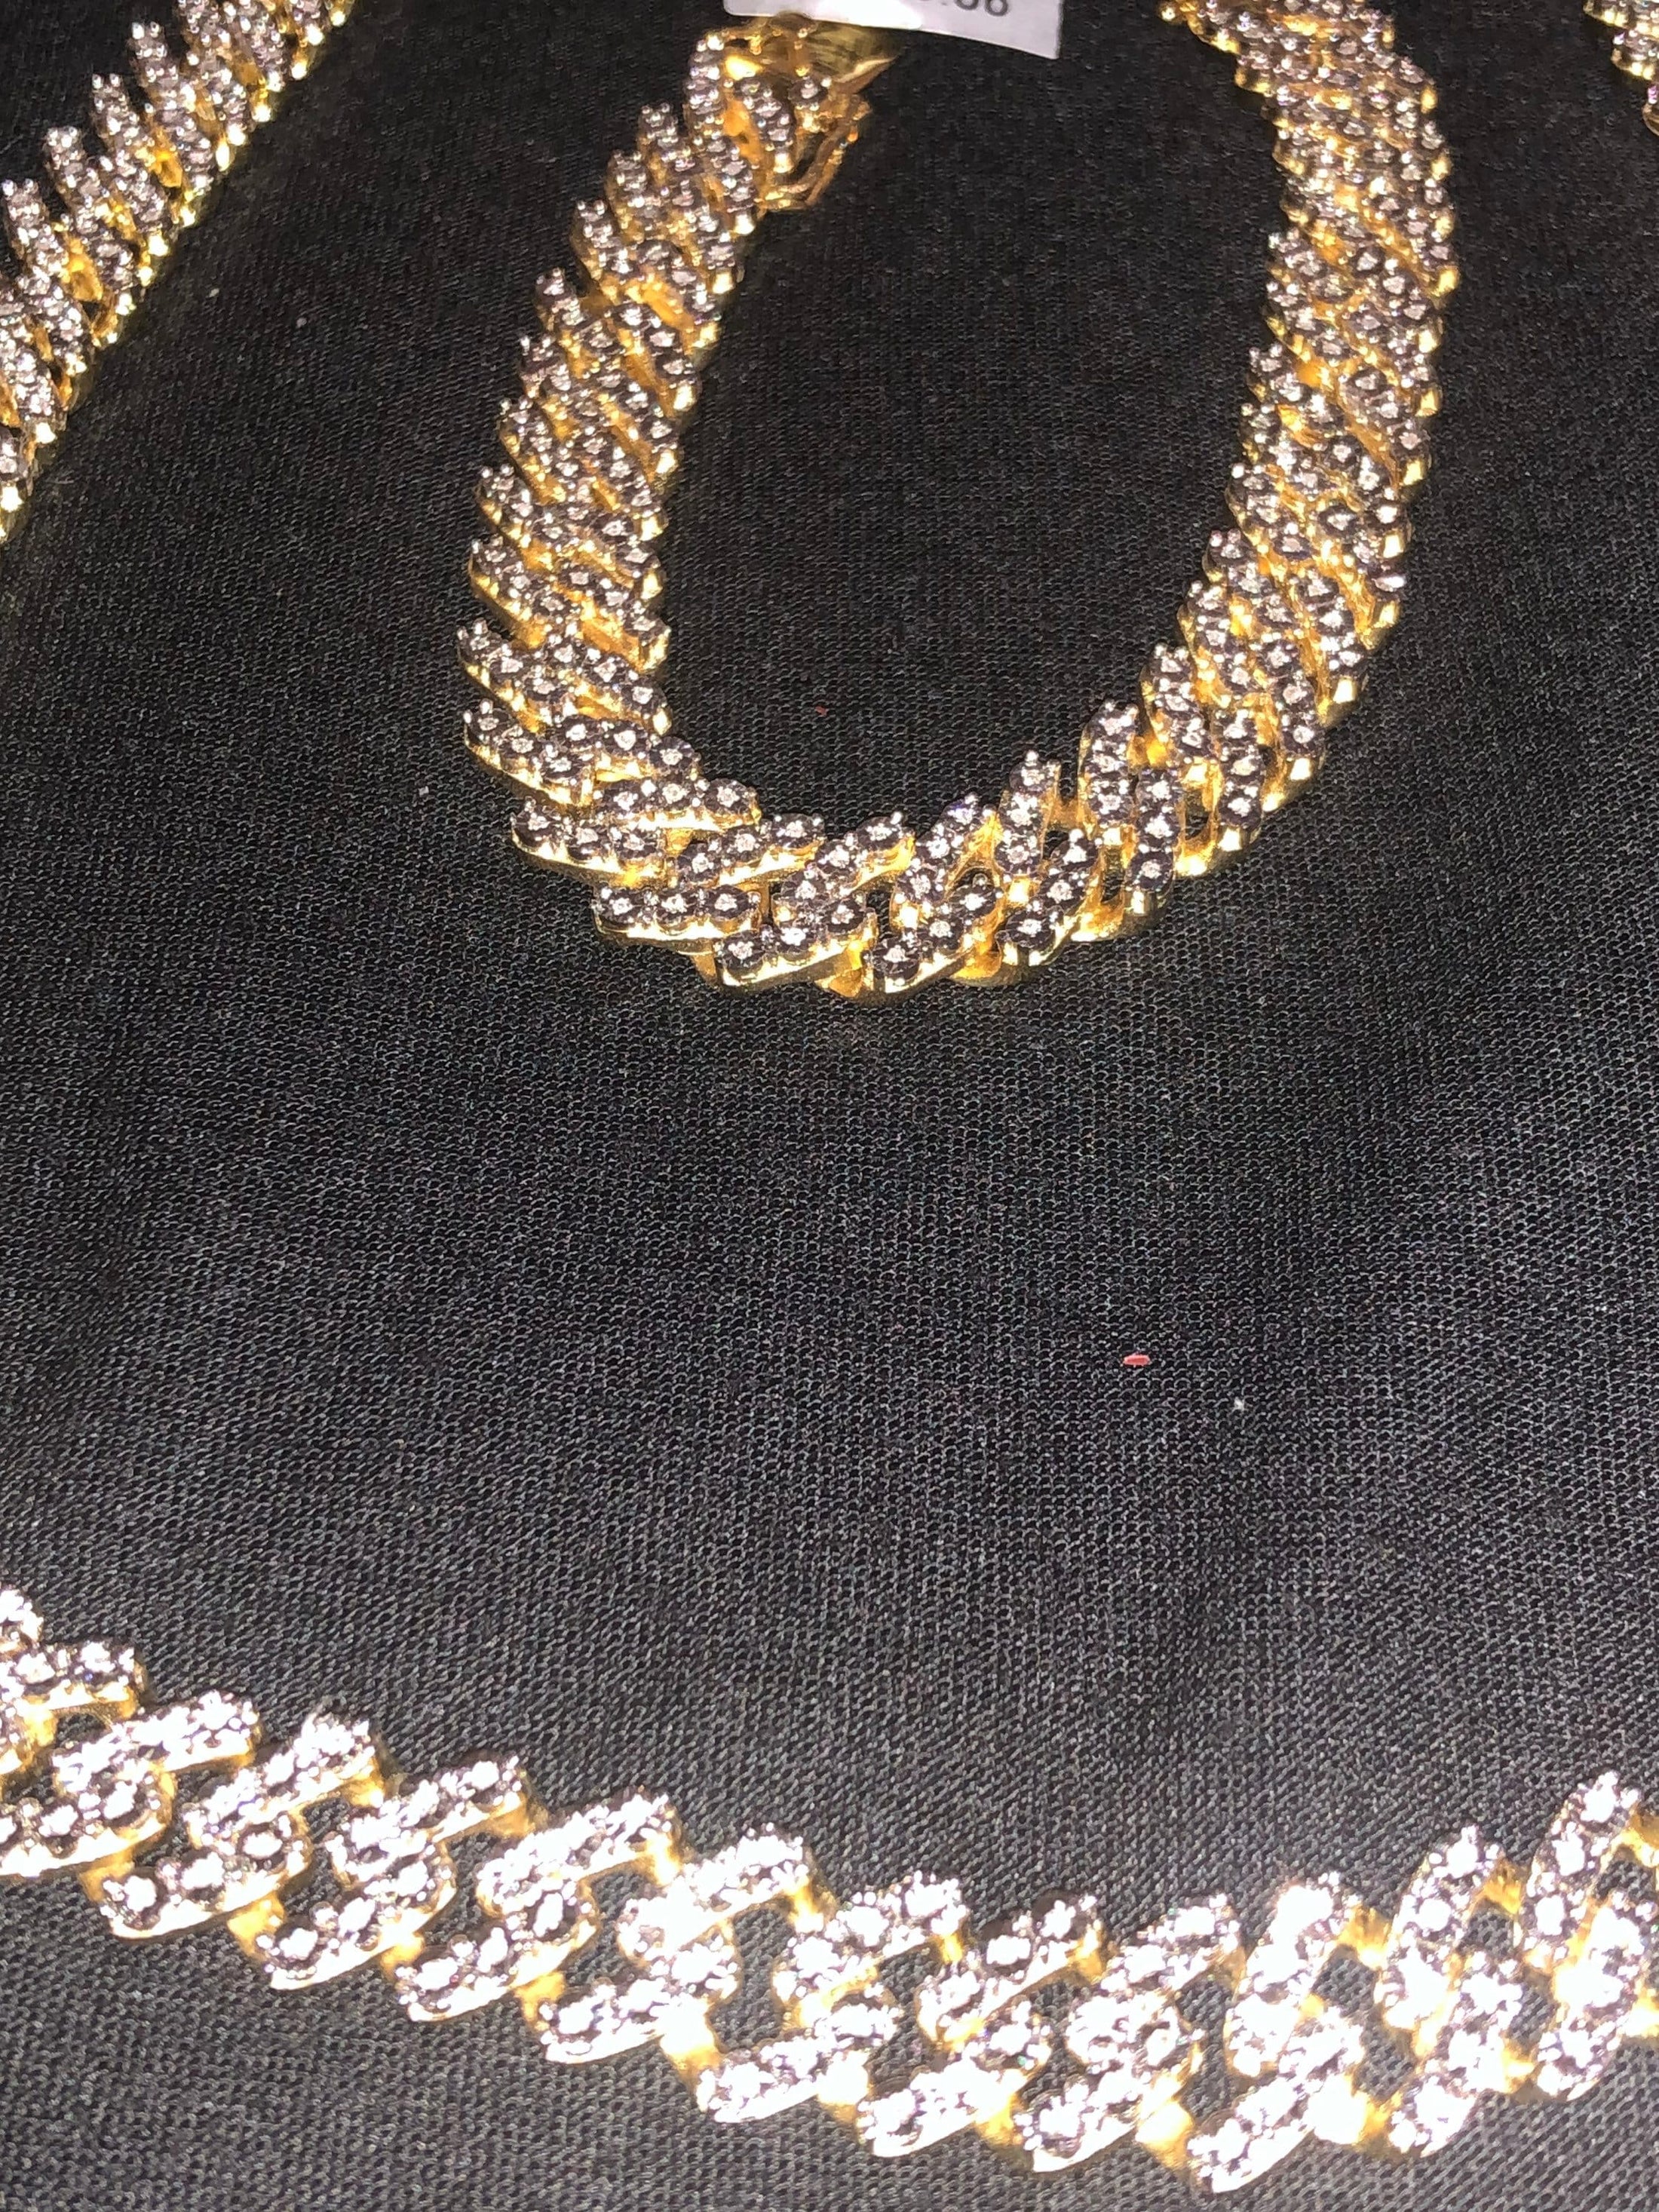 Men’s real diamond Cuban link solid chain & matching Bracelet set w/ Real Diamonds 100% natural diamonds Etsy buyer protection included SALE